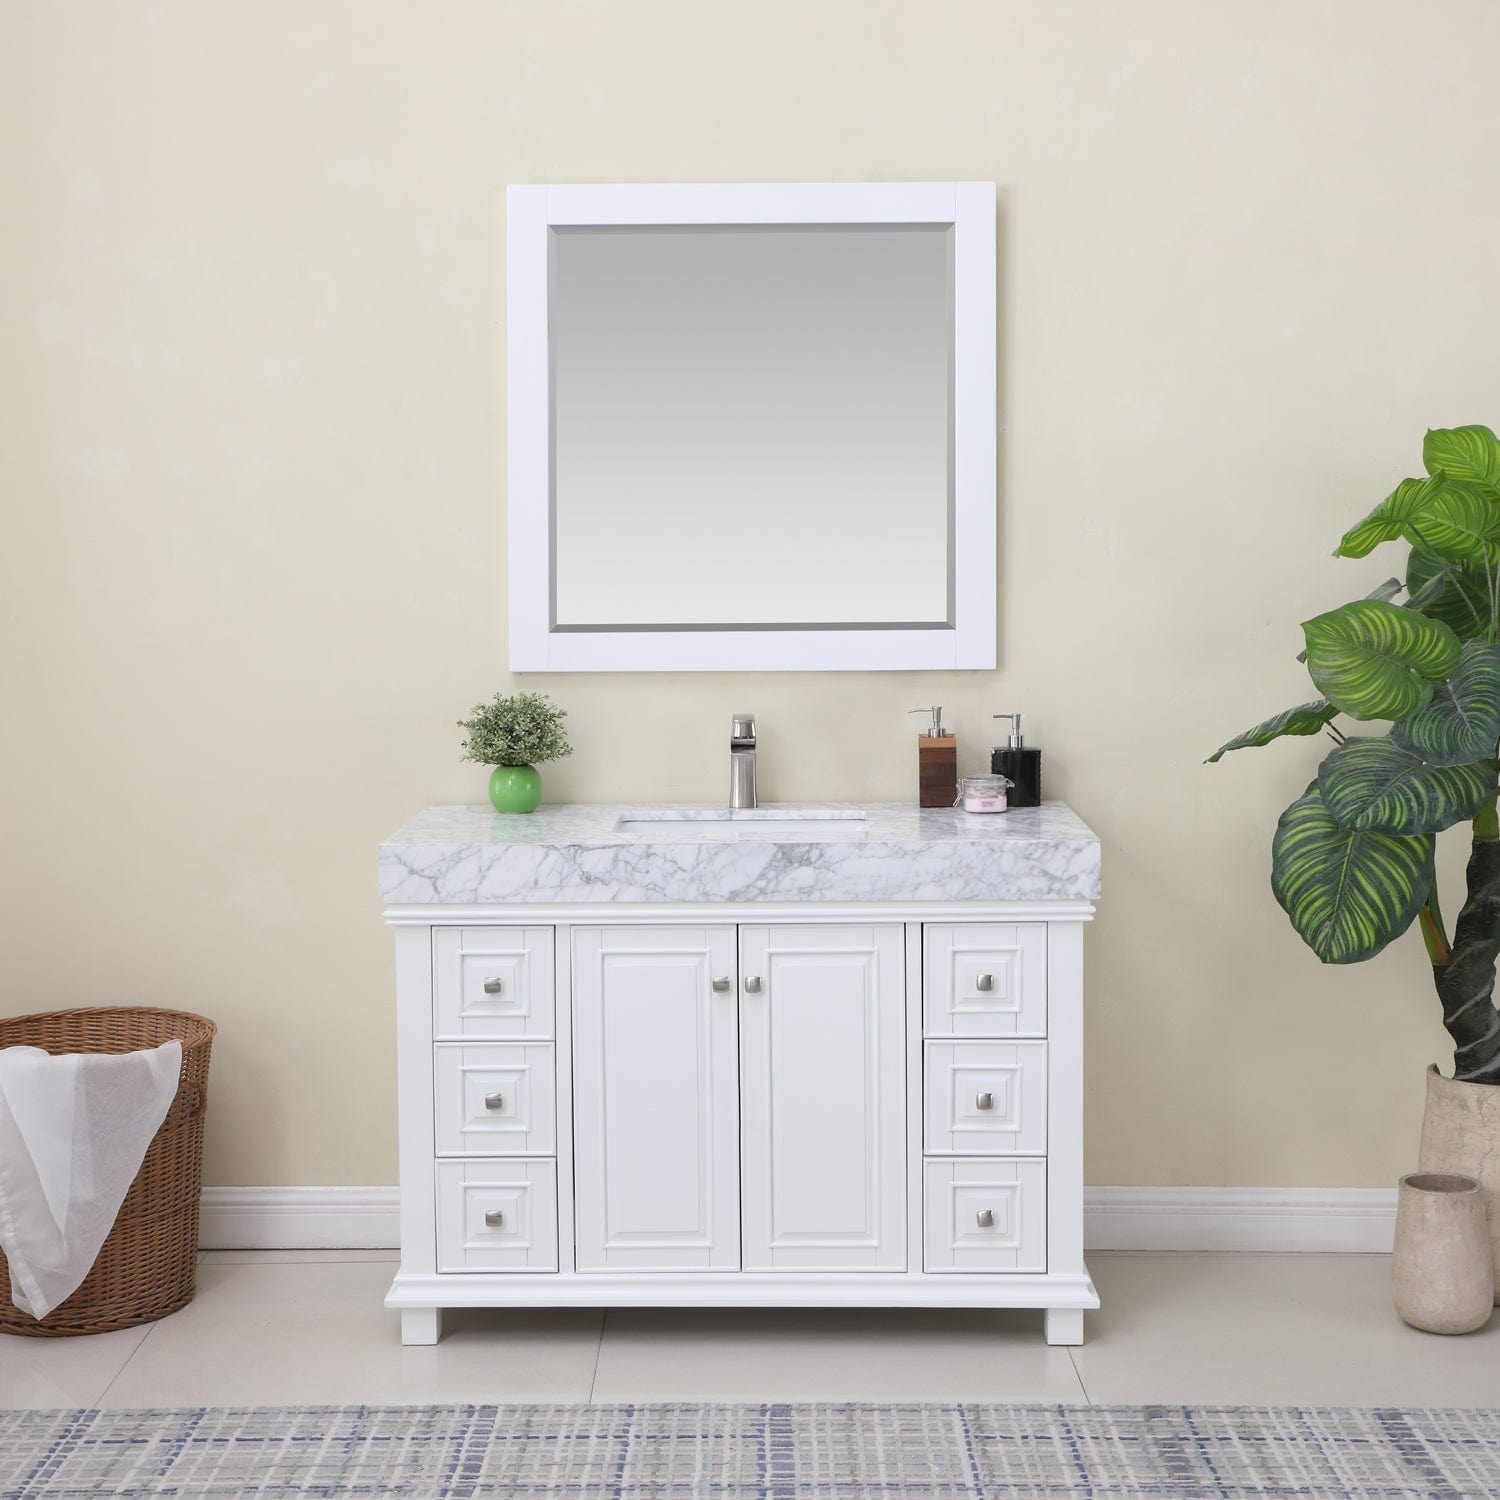 Altair Jardin 48" Single Bathroom Vanity Set in White and Carrara White Marble Countertop with Mirror 539048-WH-CA - Molaix631112971010Vanity539048-WH-CA